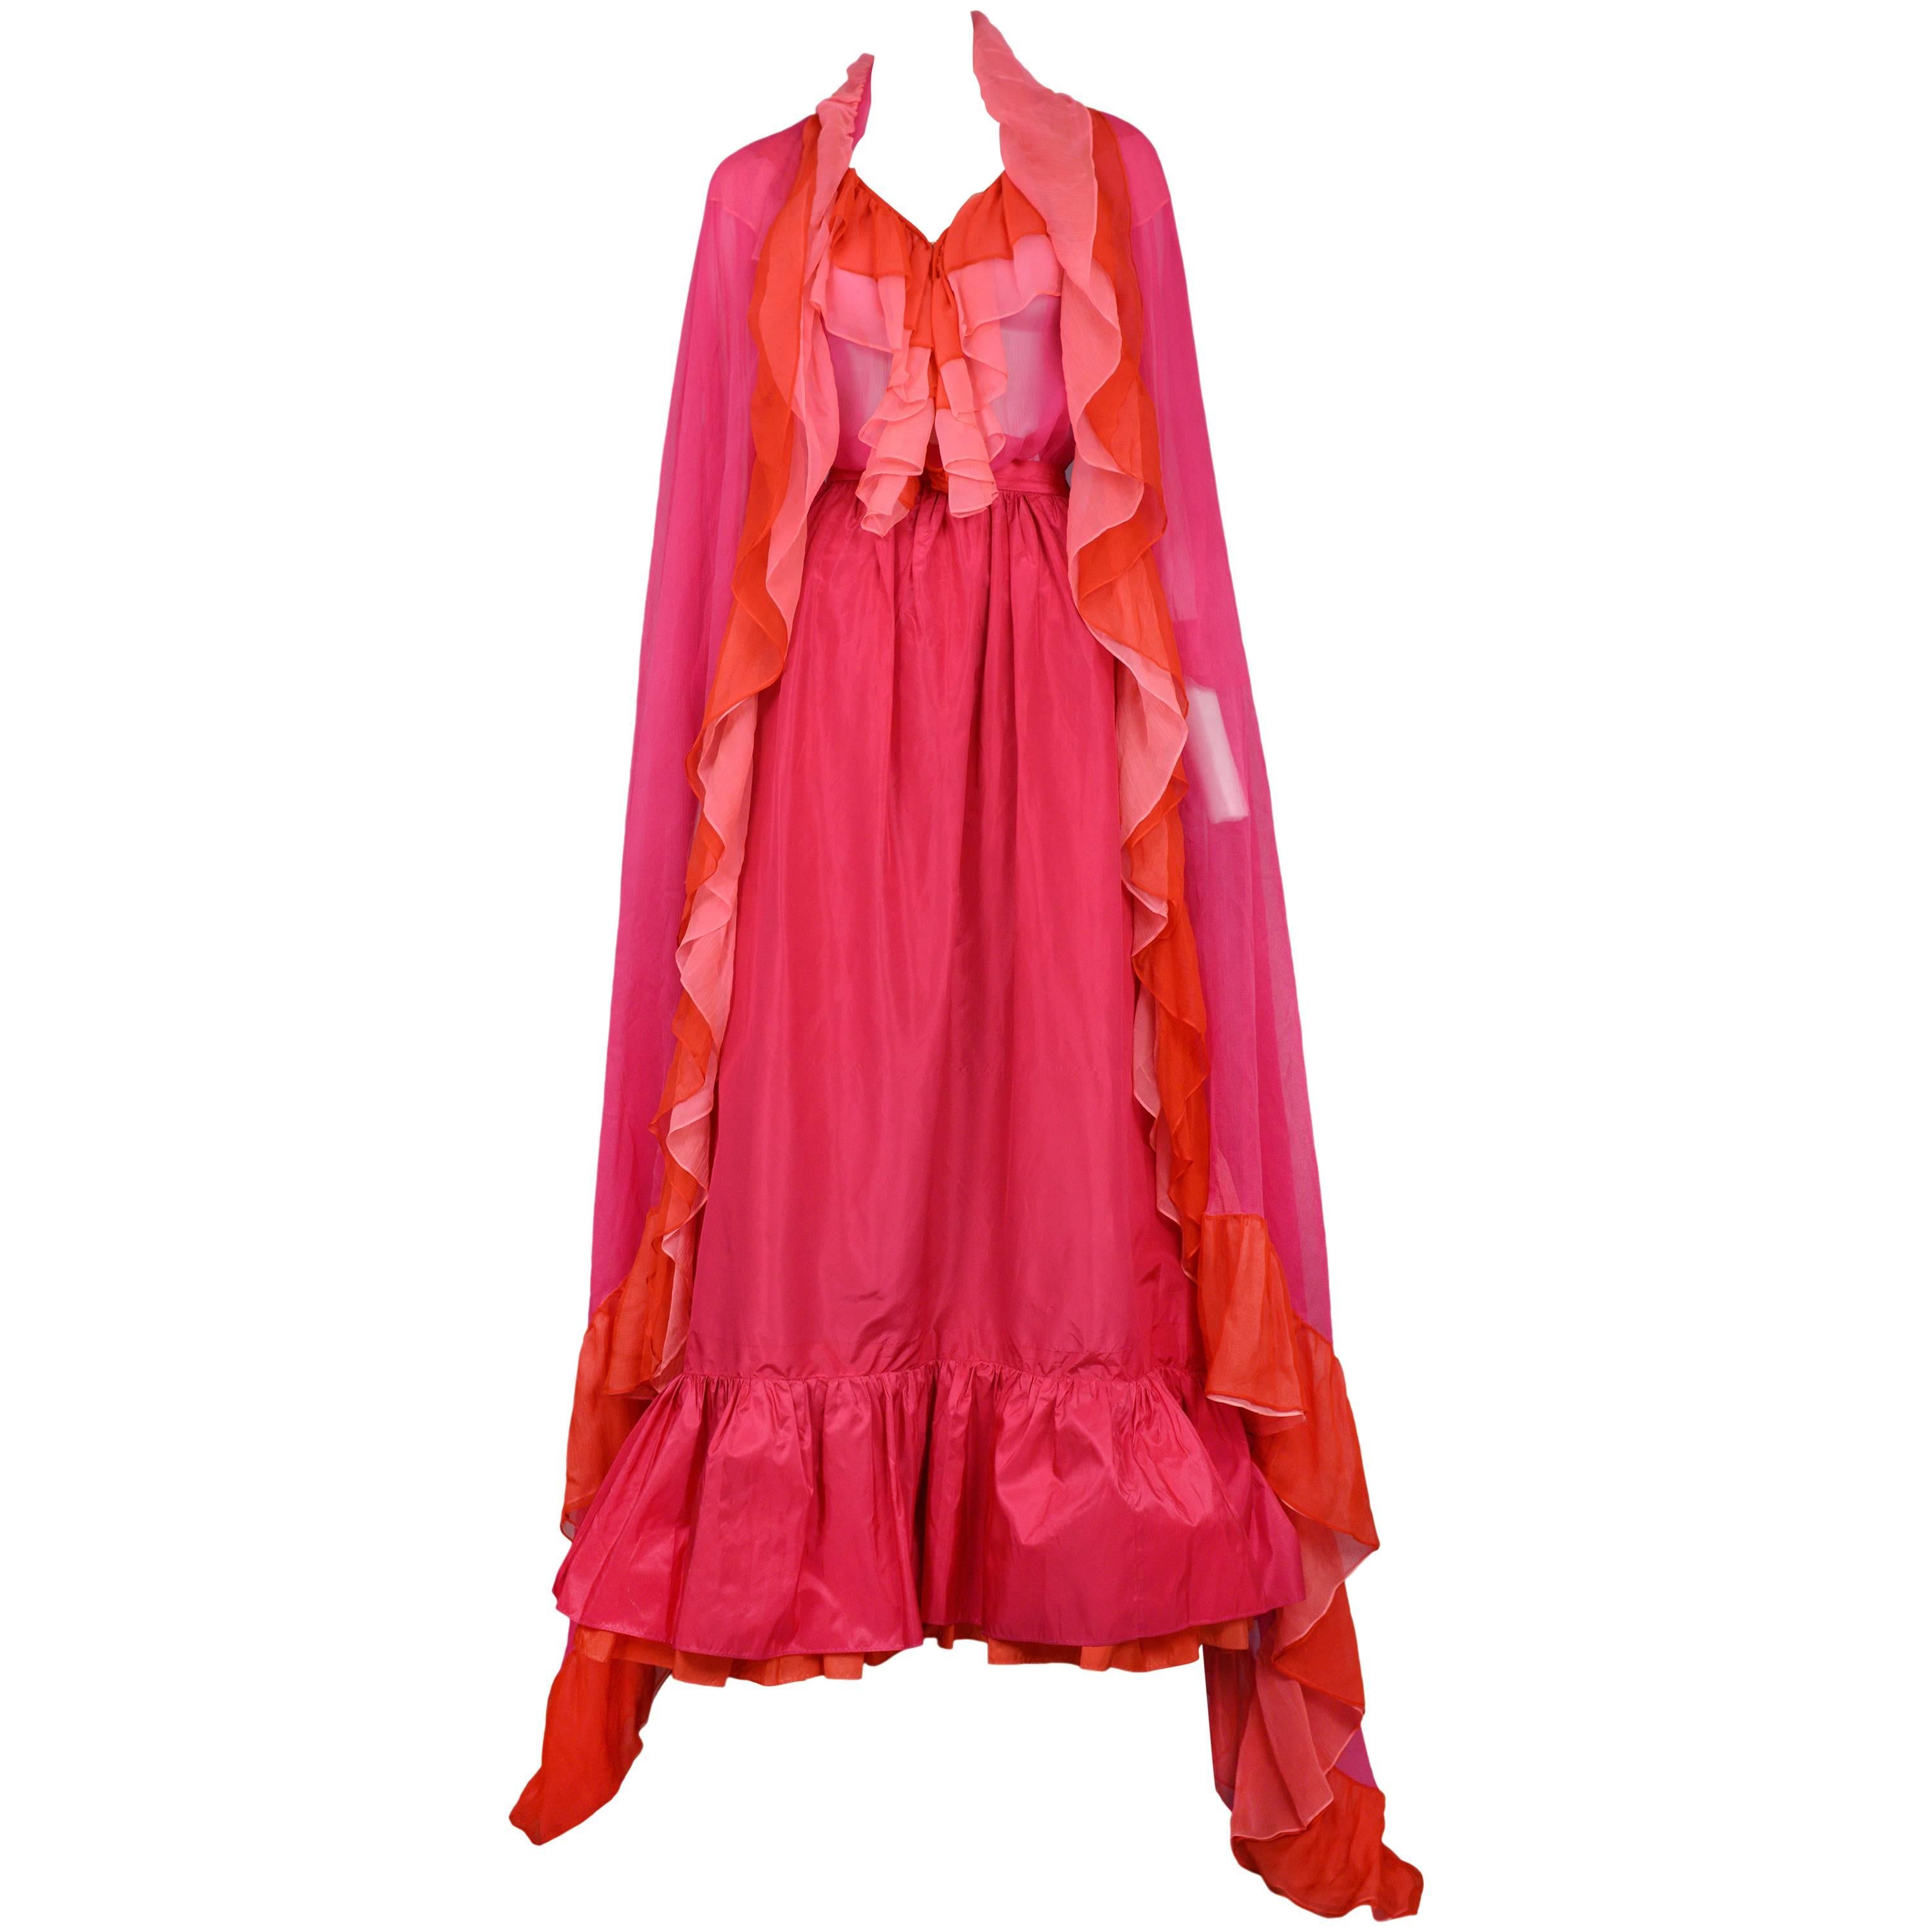 Vintage Yves Saint Laurent three piece ensemble featuring a ruffle blouse and ruffle shawl comprised of fuchsia, pink and red chiffon. The look is completed with a matching fuchsia taffeta ball skirt featuring a red double layer flounce at the